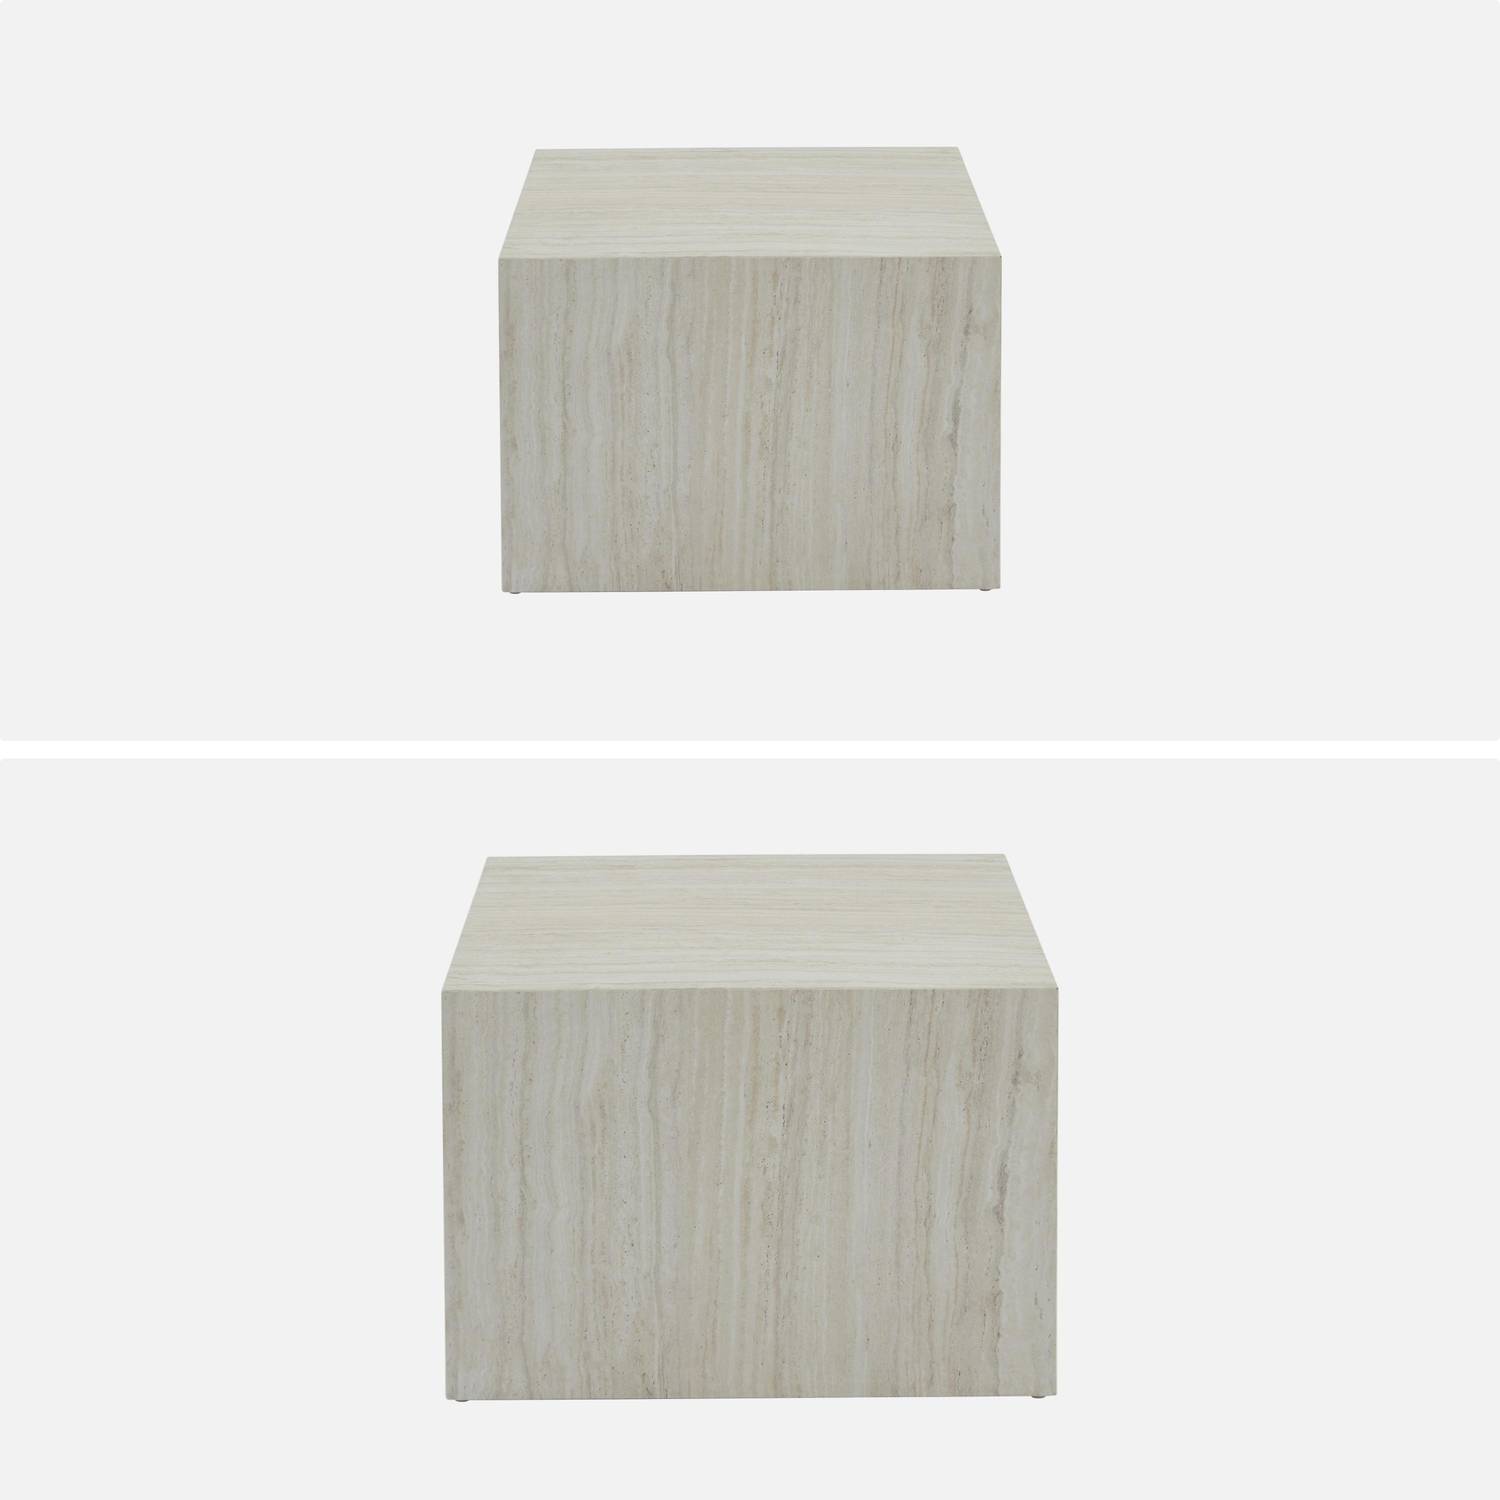 Set of 2 square coffee tables with marble effect, white, L50xW50xH33cm &  L58xW58xH40cm, Paros Photo6